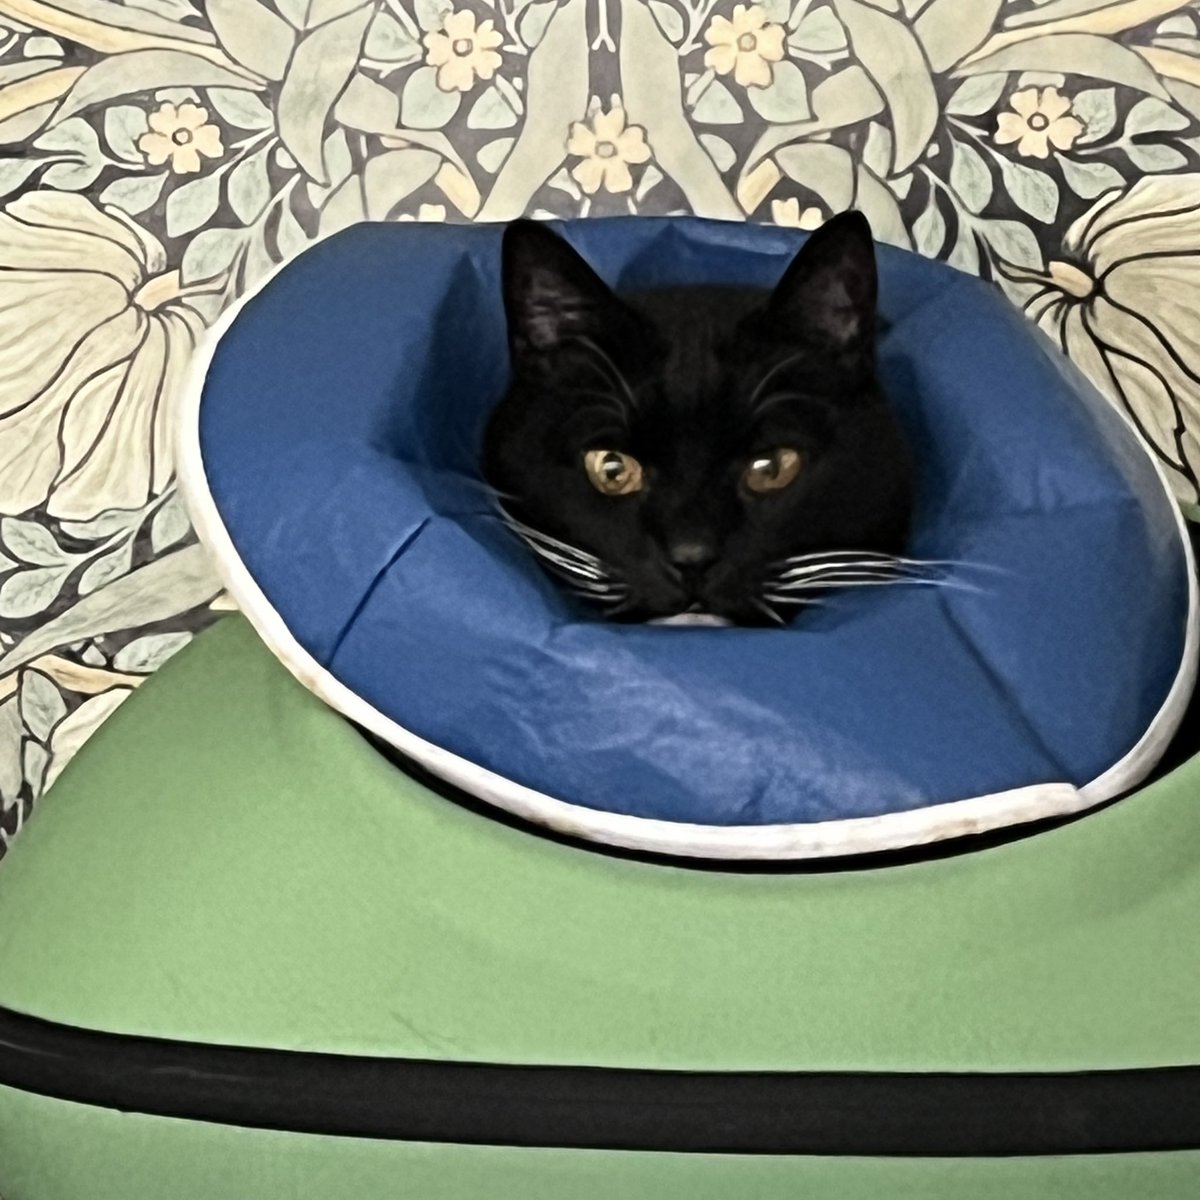 Harpo is very very happy to be out of my room and back in his favorite bed. #CatsOfTwitter #TuxieGang